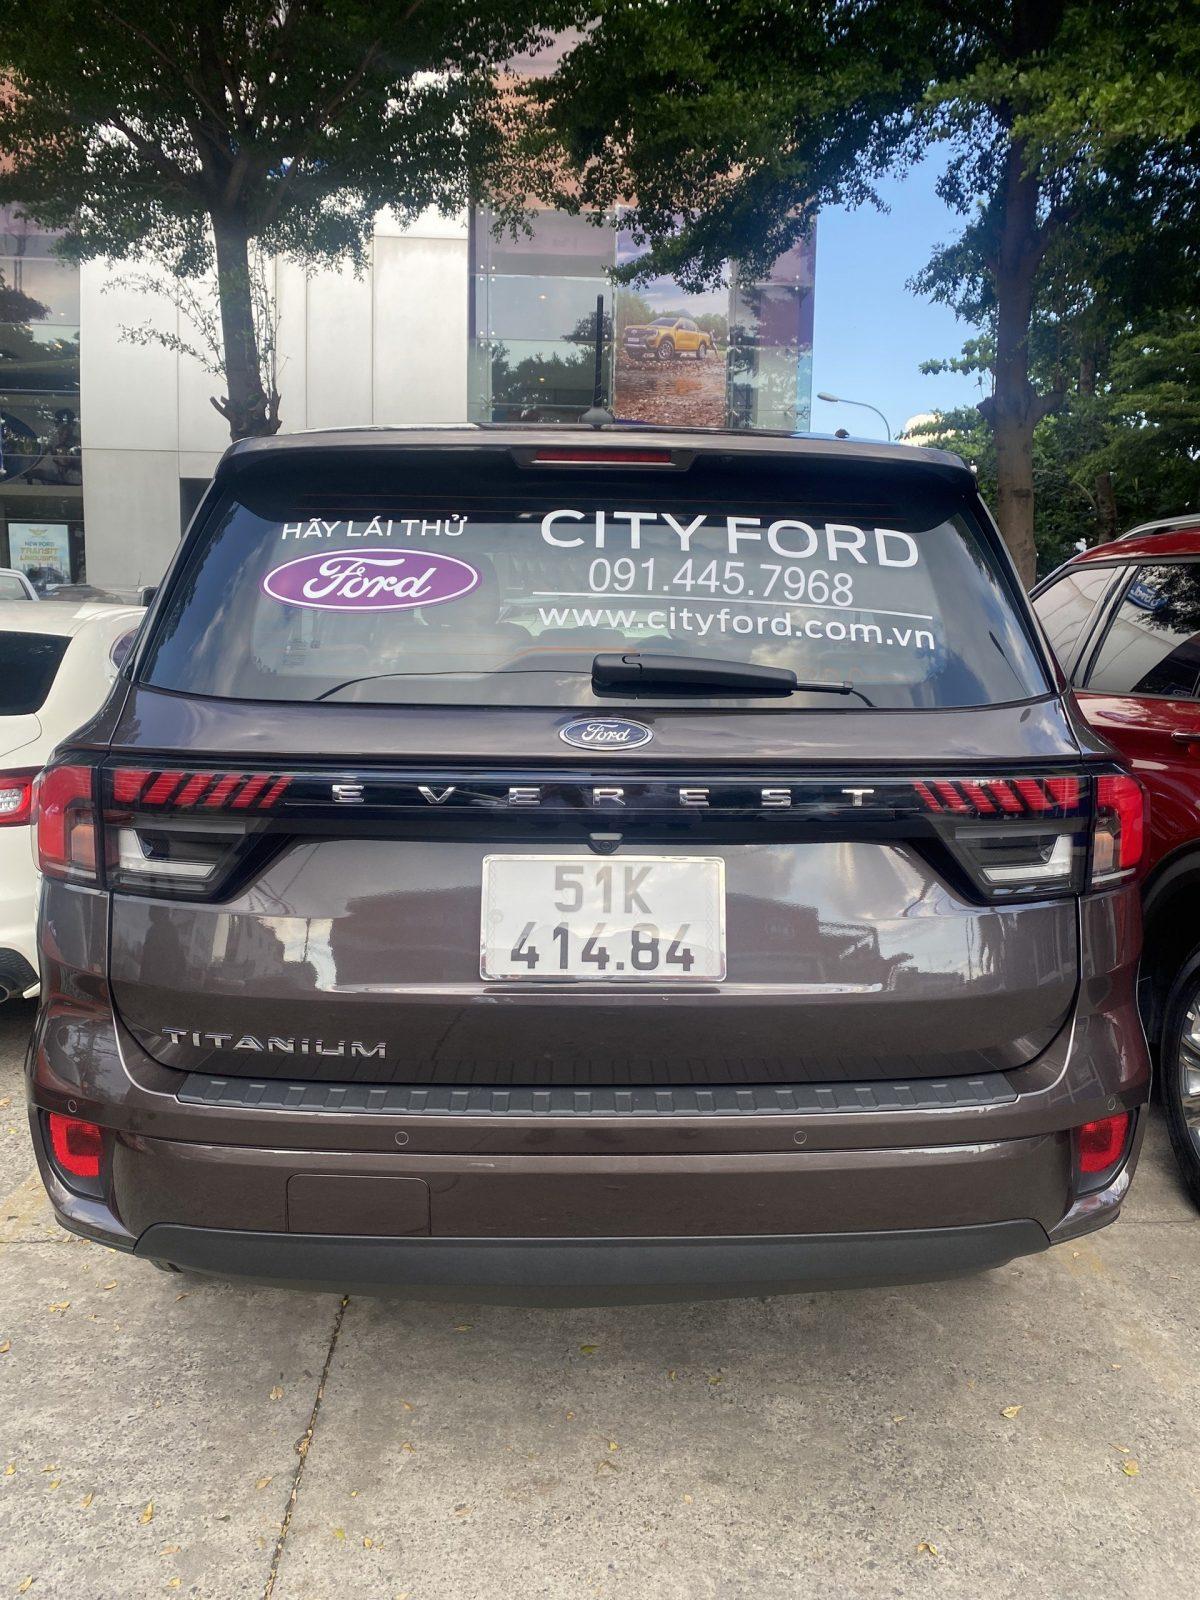 You are currently viewing City Ford tổ chức lái thử xe Everest Mẫu Mới & Ranger